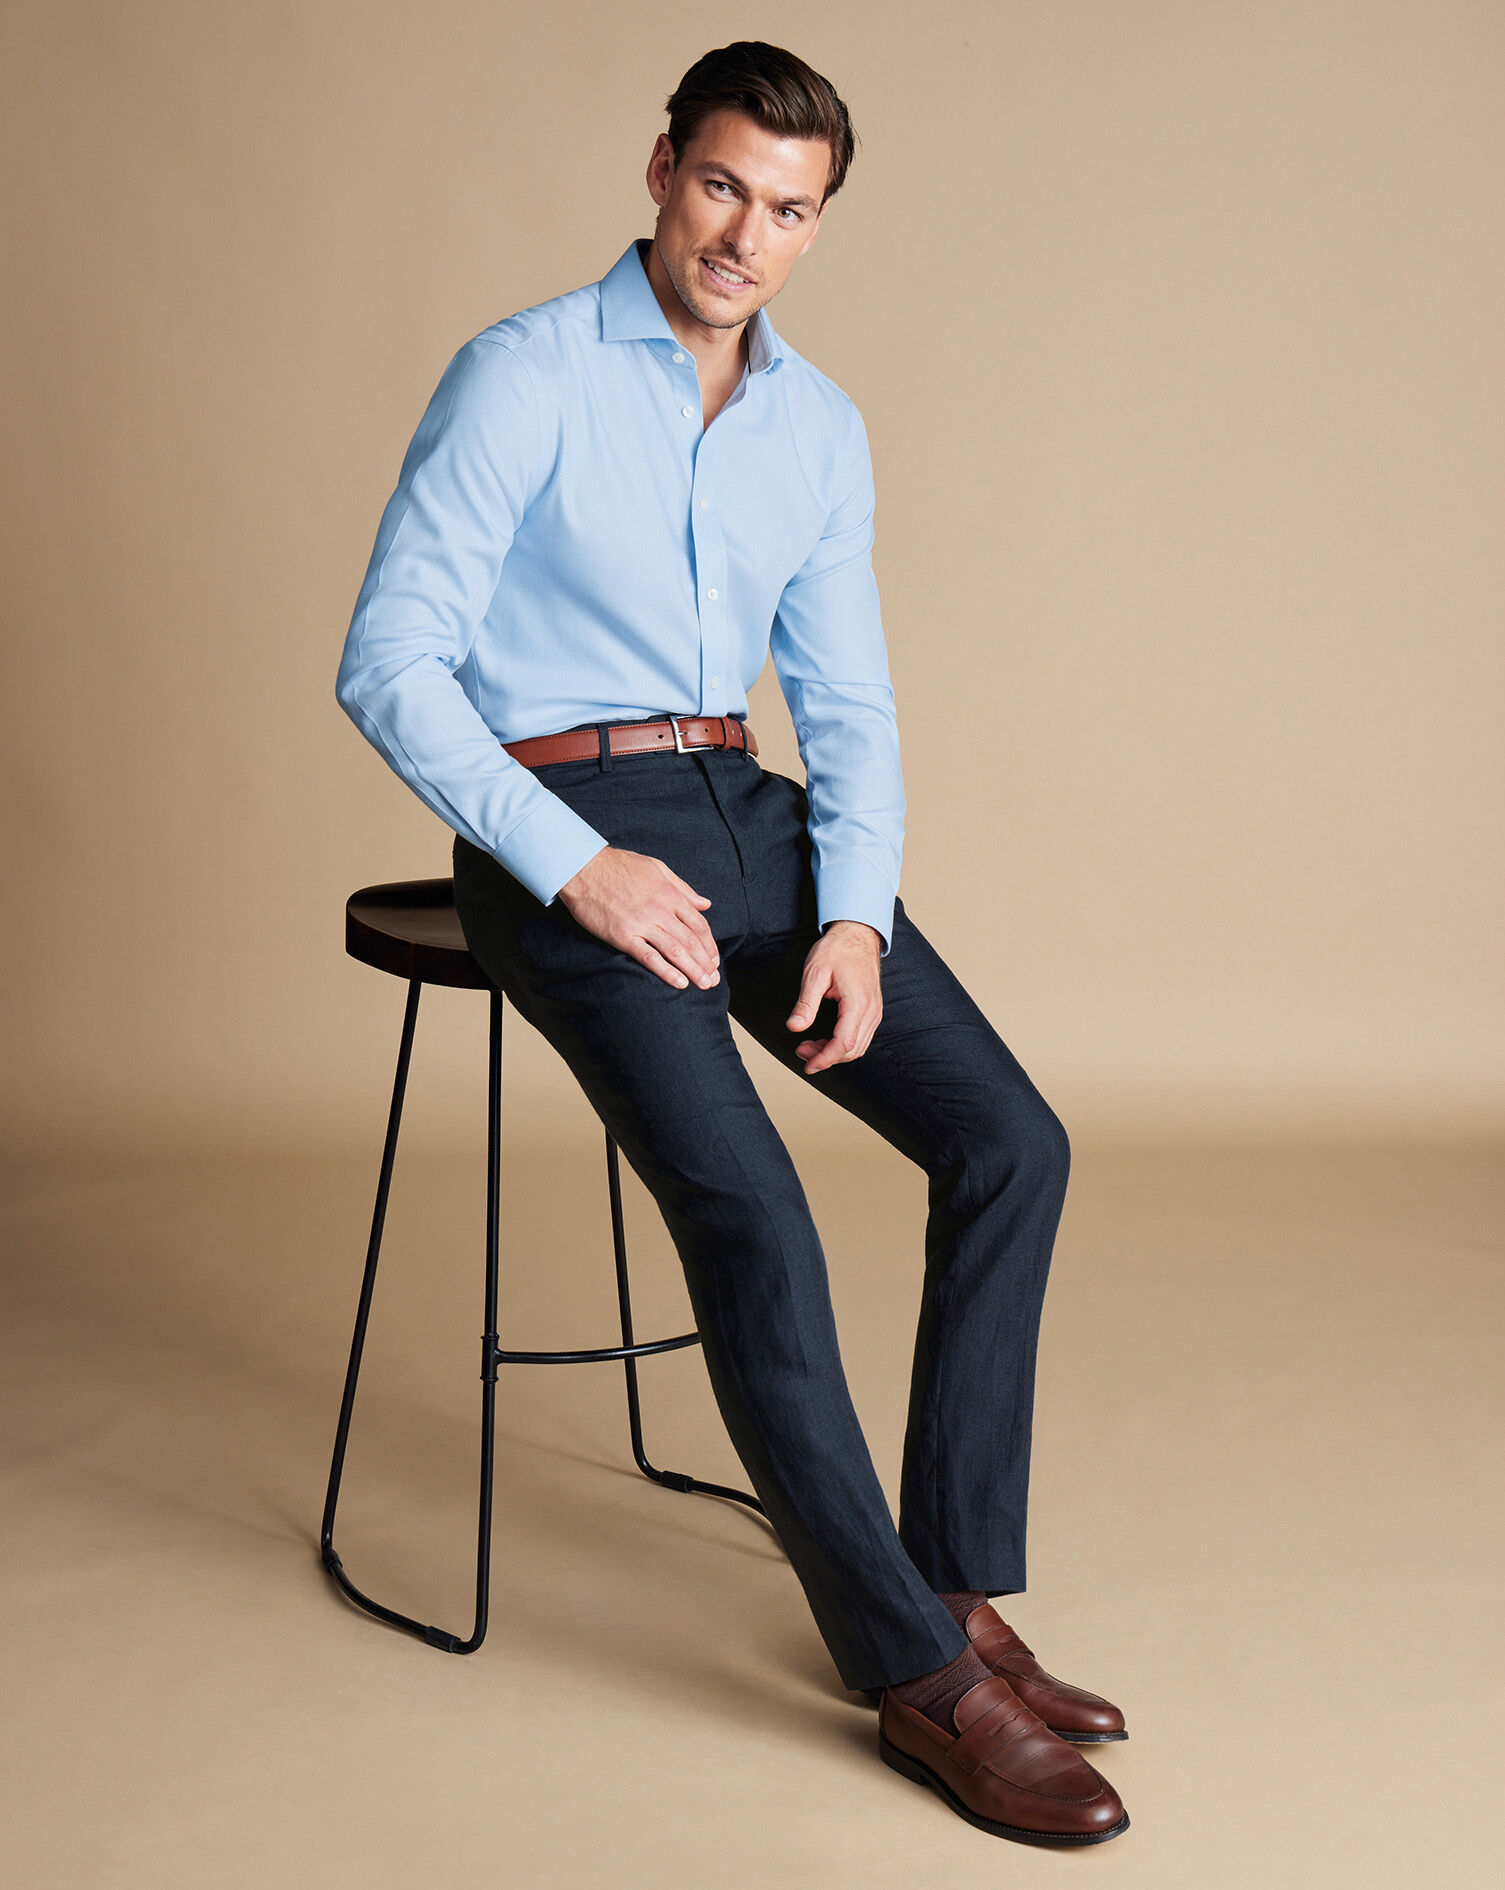 What pants goes with a sky-blue shirt? - Quora